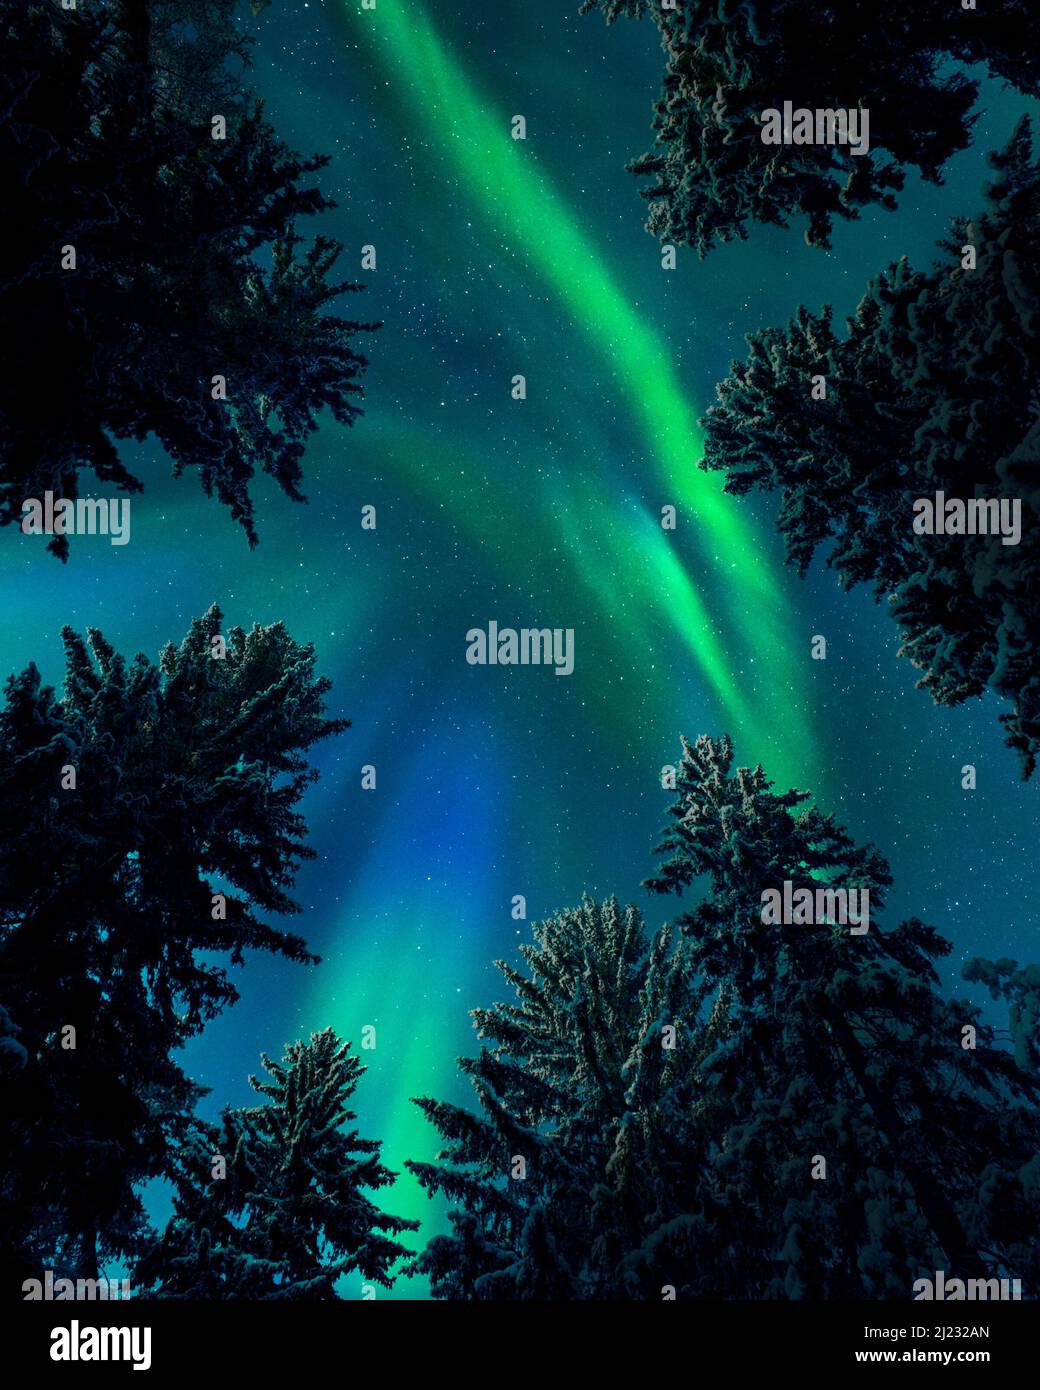 Northern lights (Aurora borealis) above treetops, snowy spruce trees, boreal forest in cold winter night, Finland. Stock Photo